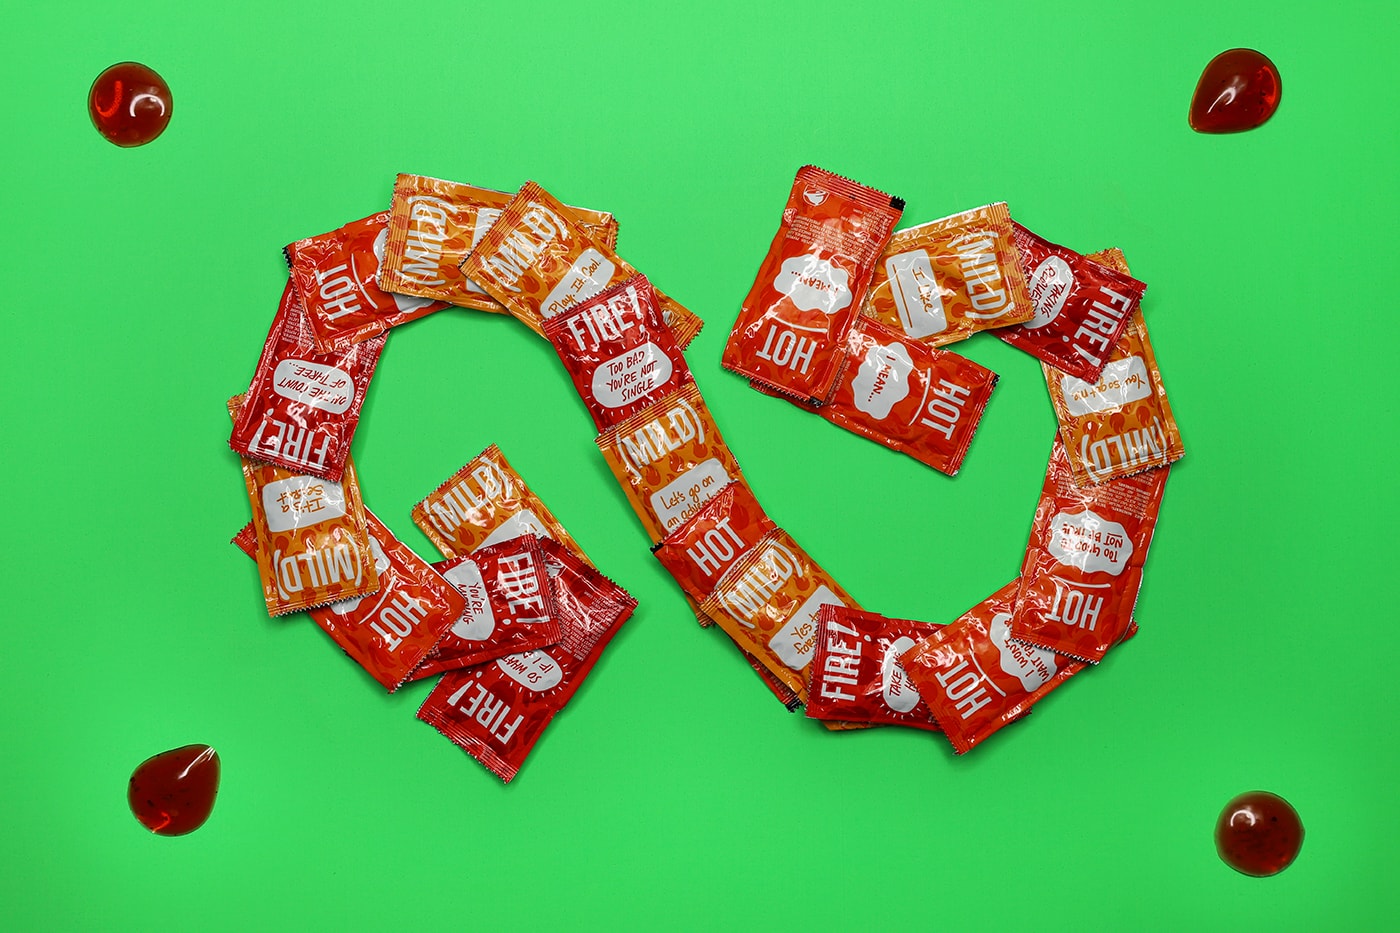 Taco Bell TerraCycle Hot Sauce Packets Recycling Partnership Collaboration Sustainability